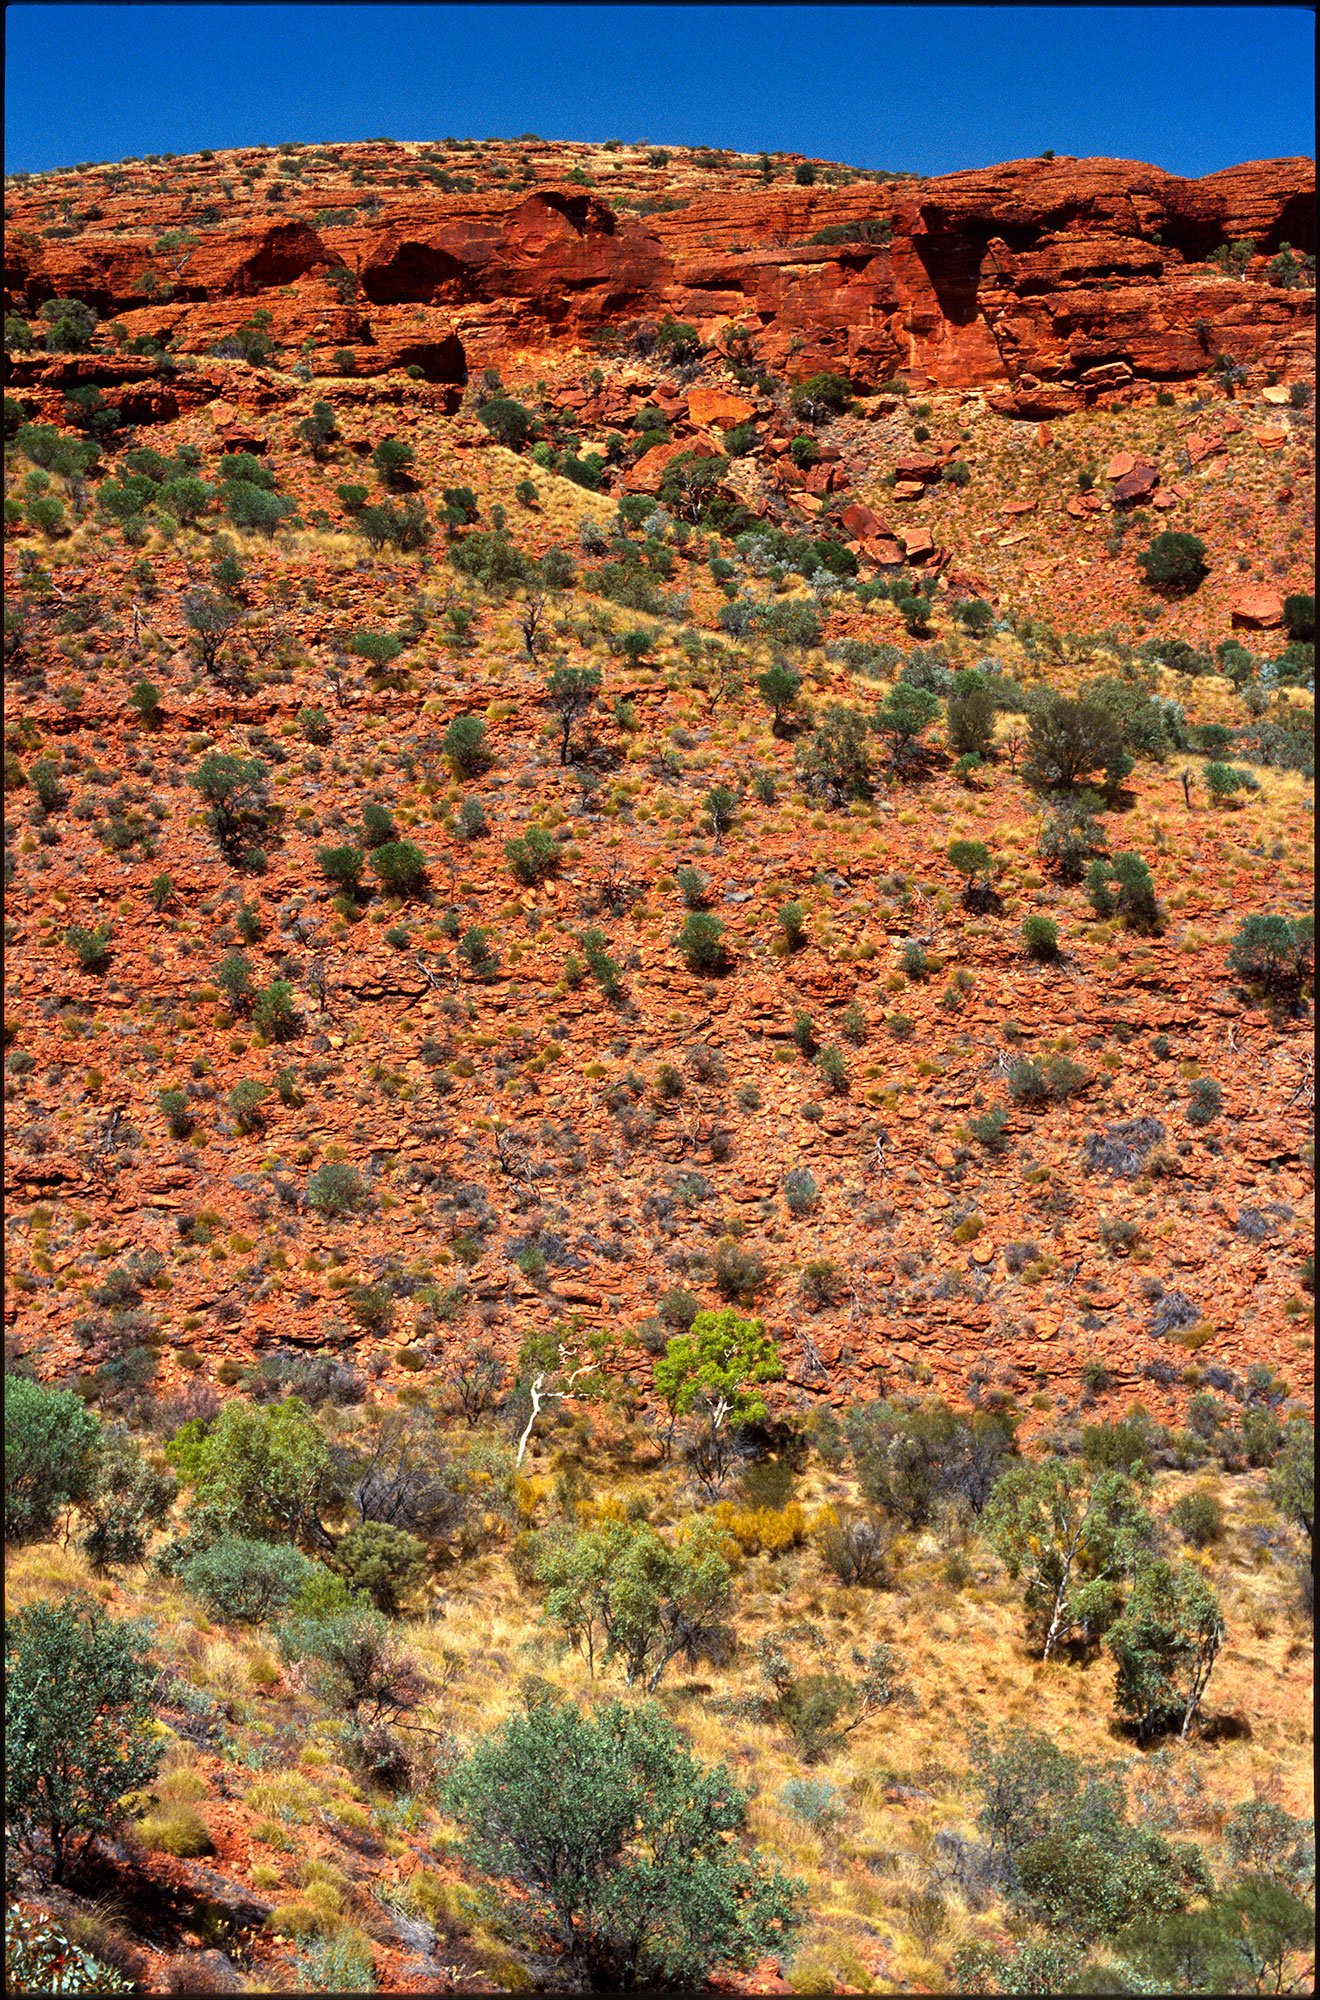 king's canyon, northern territory 2002